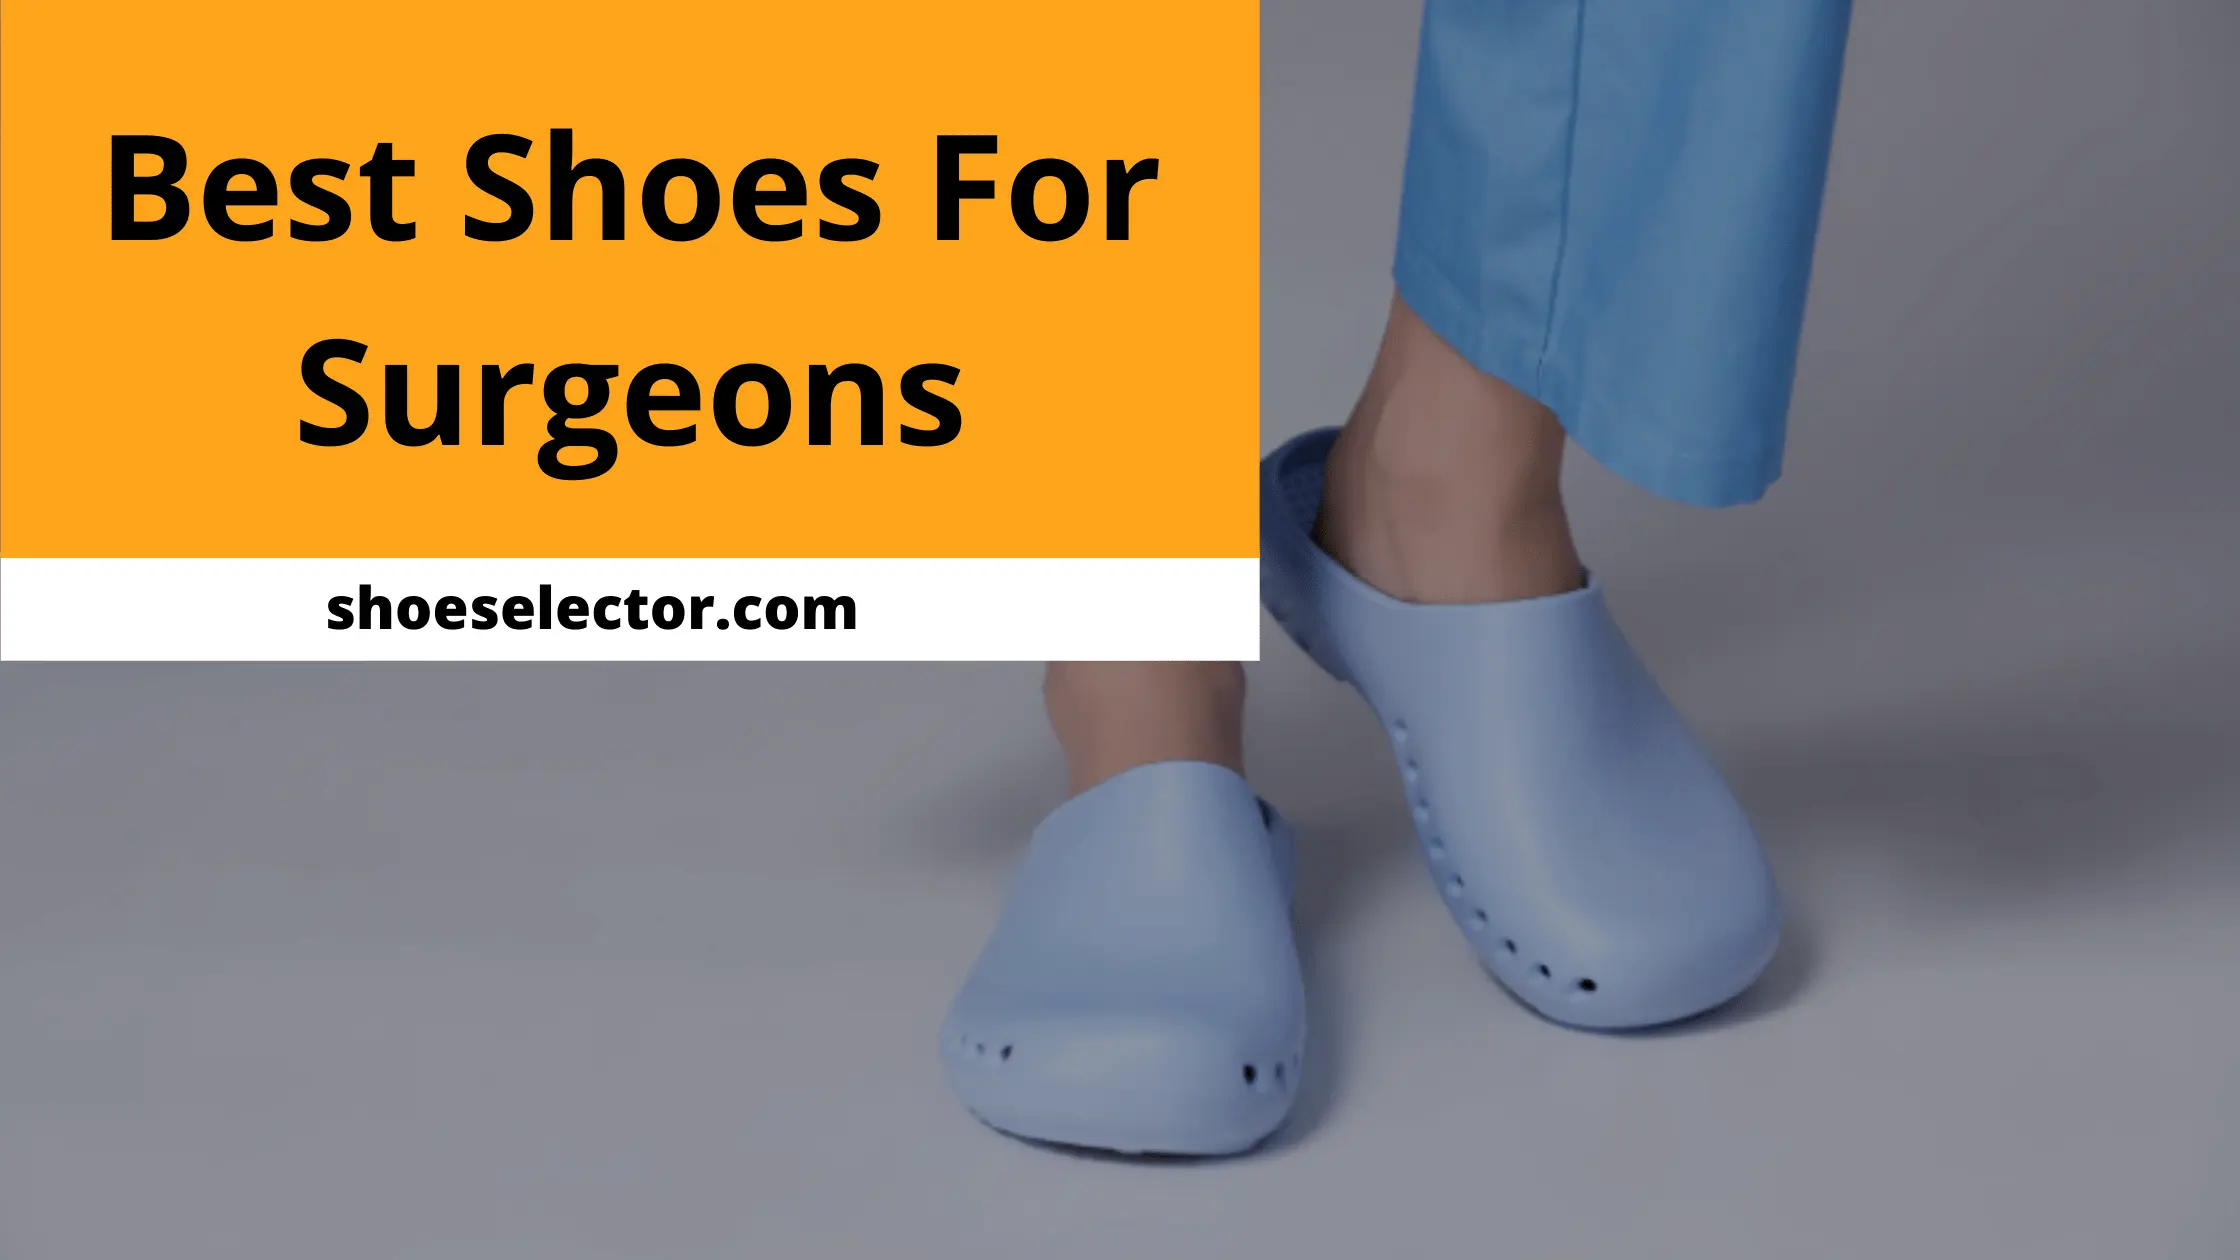 Best Shoes For Surgeons - Complete Buying Guide